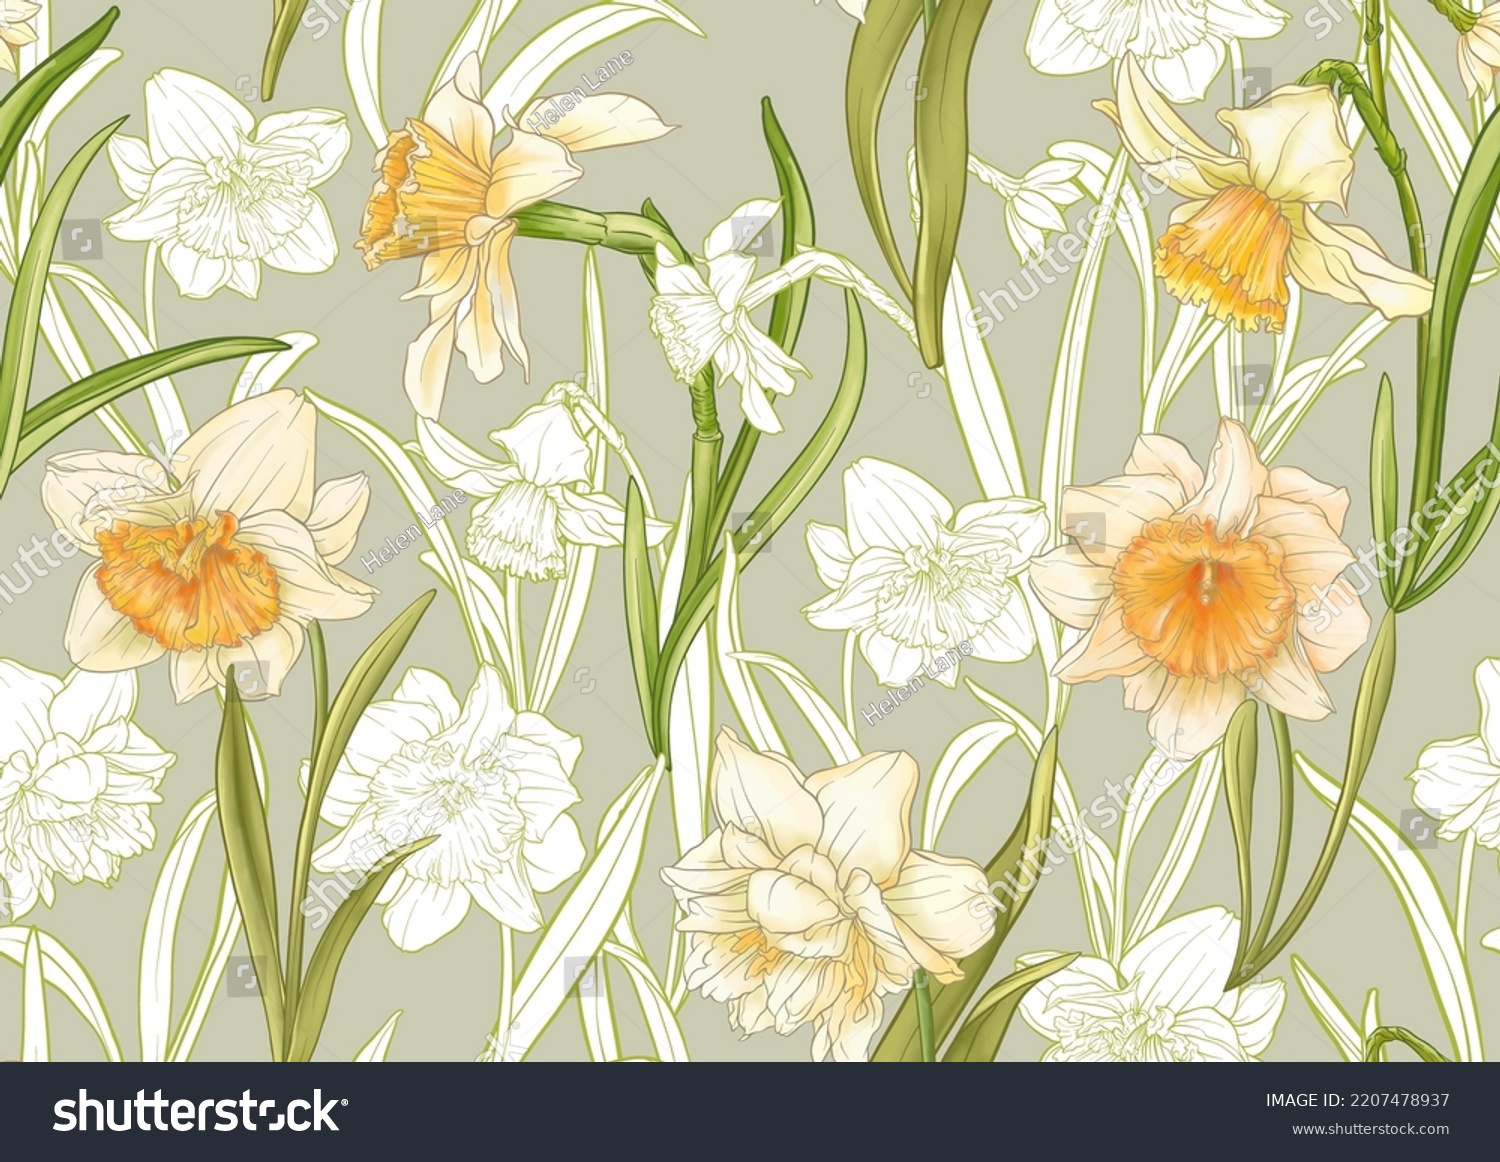 SVG of White daffodils and tulips flowers, the early spring flowers. Seamless pattern, background. Vector illustration. In botanical style svg